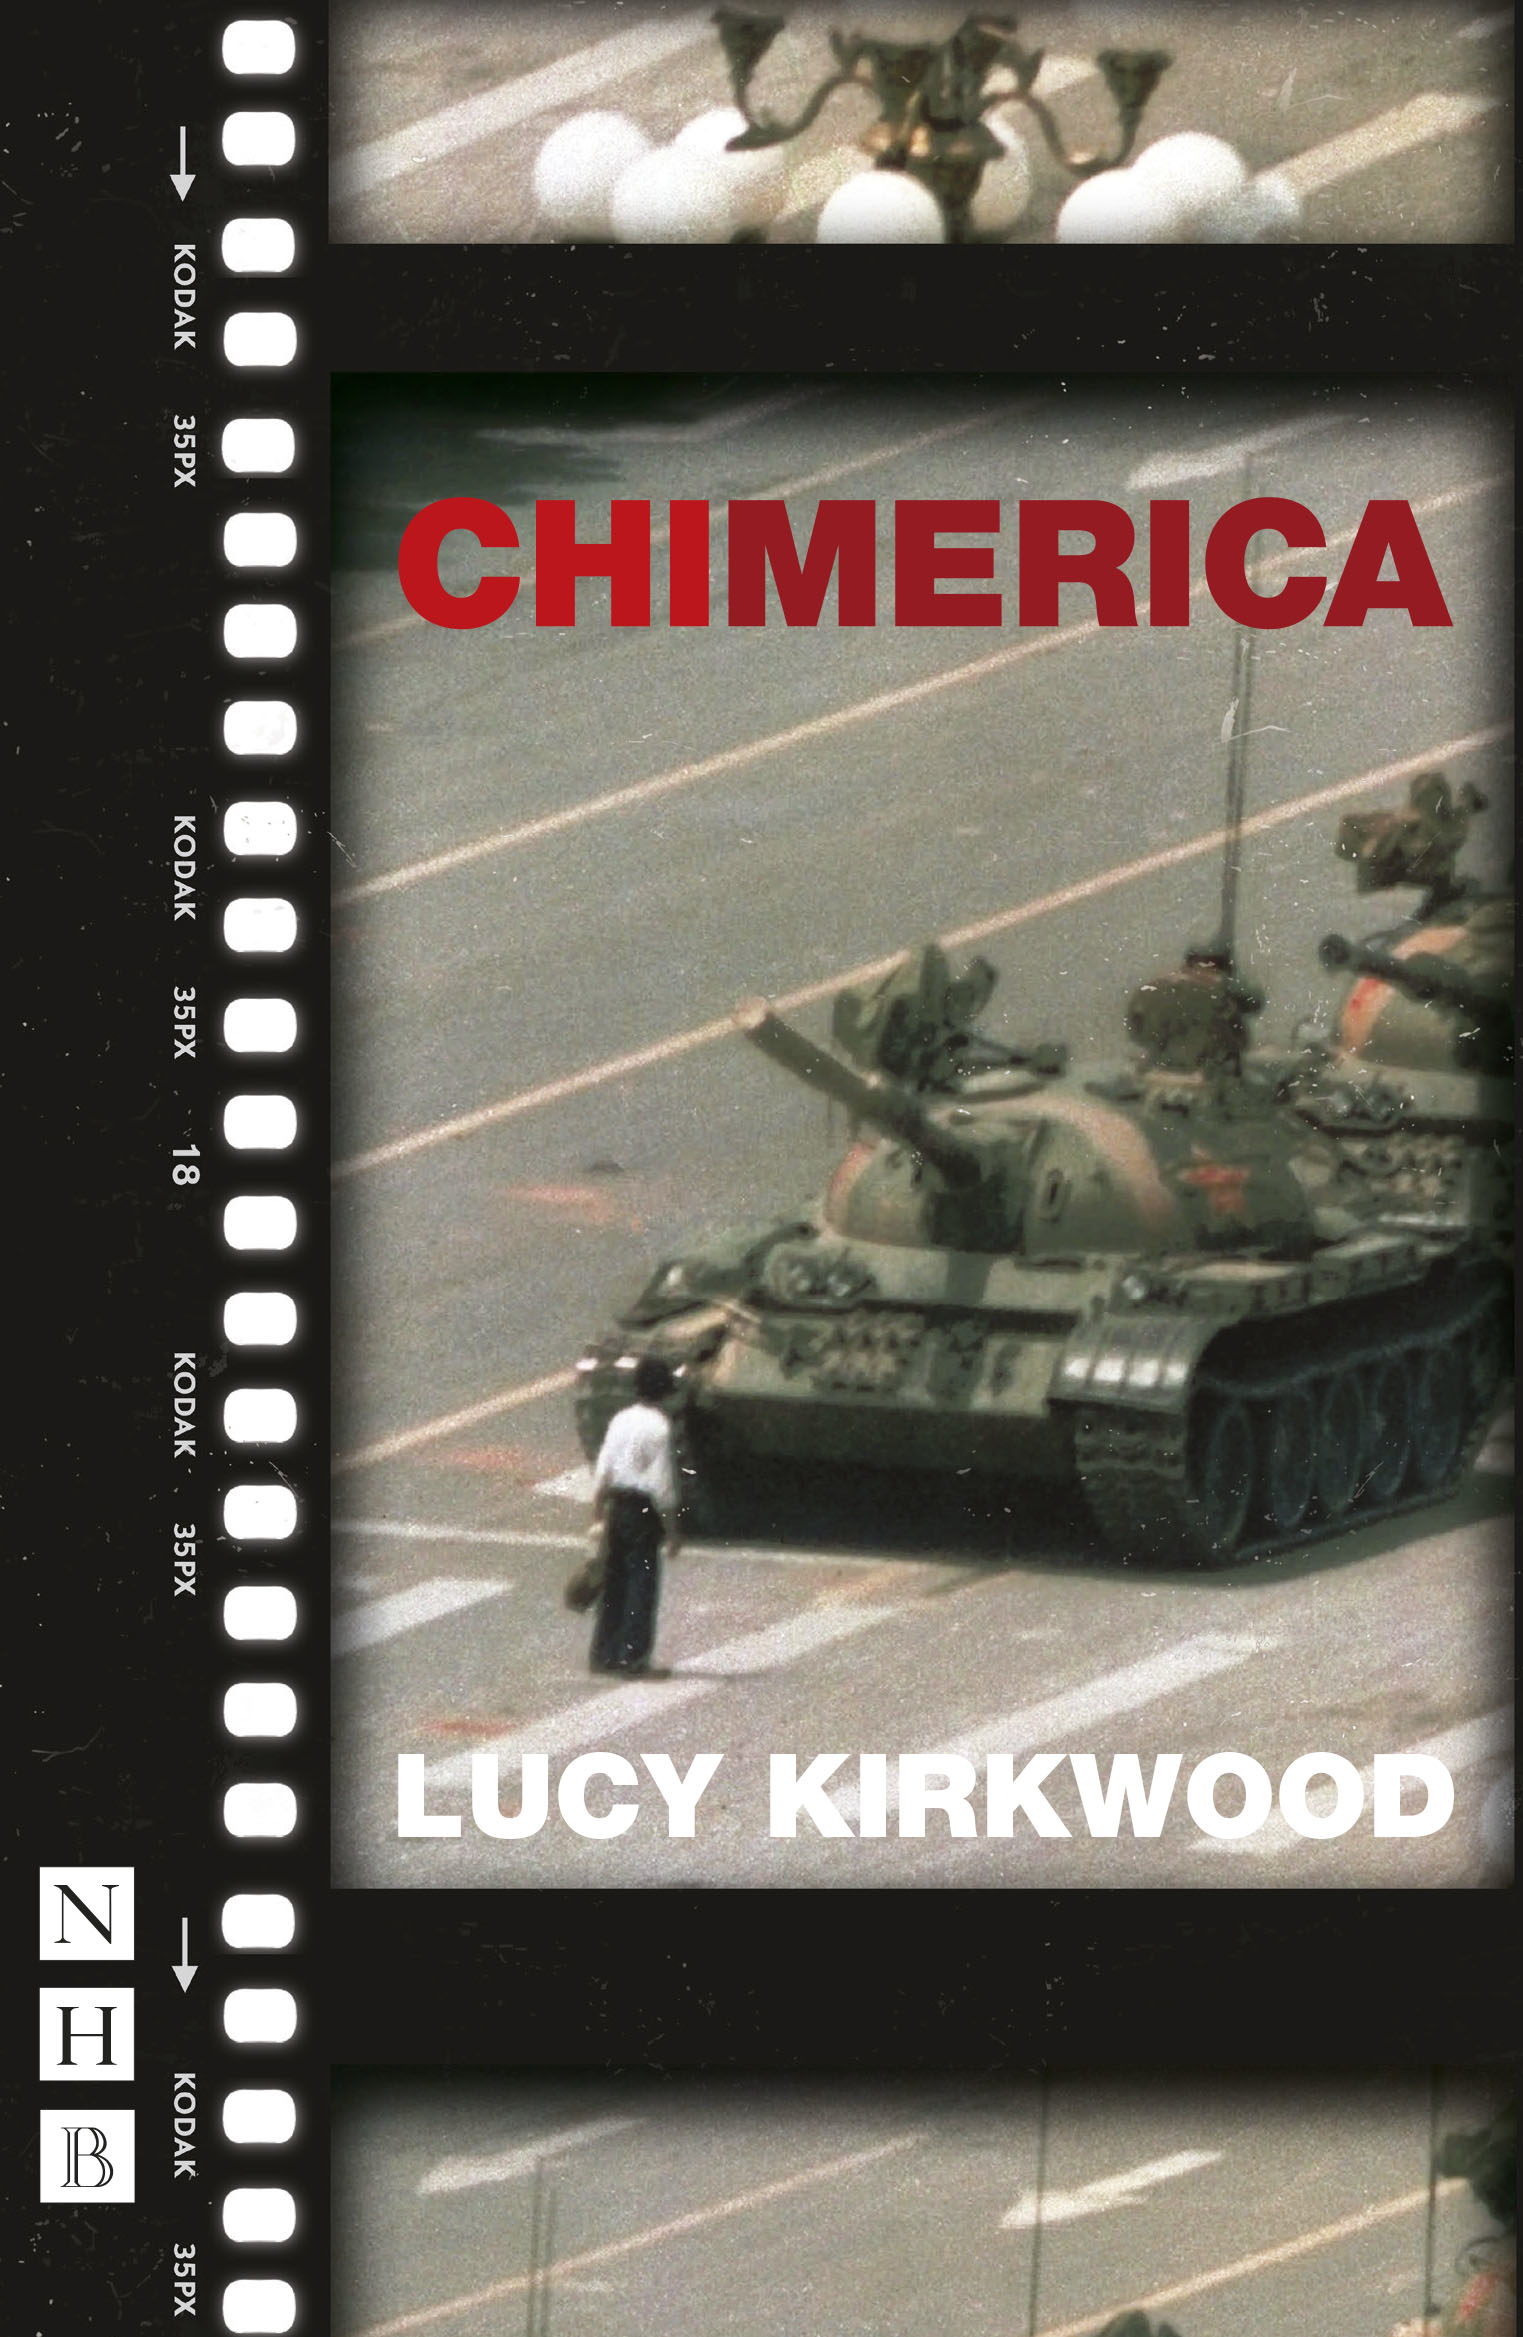 Nick Hern Books - Images for News items - Chimerica_WestEnd.jpg